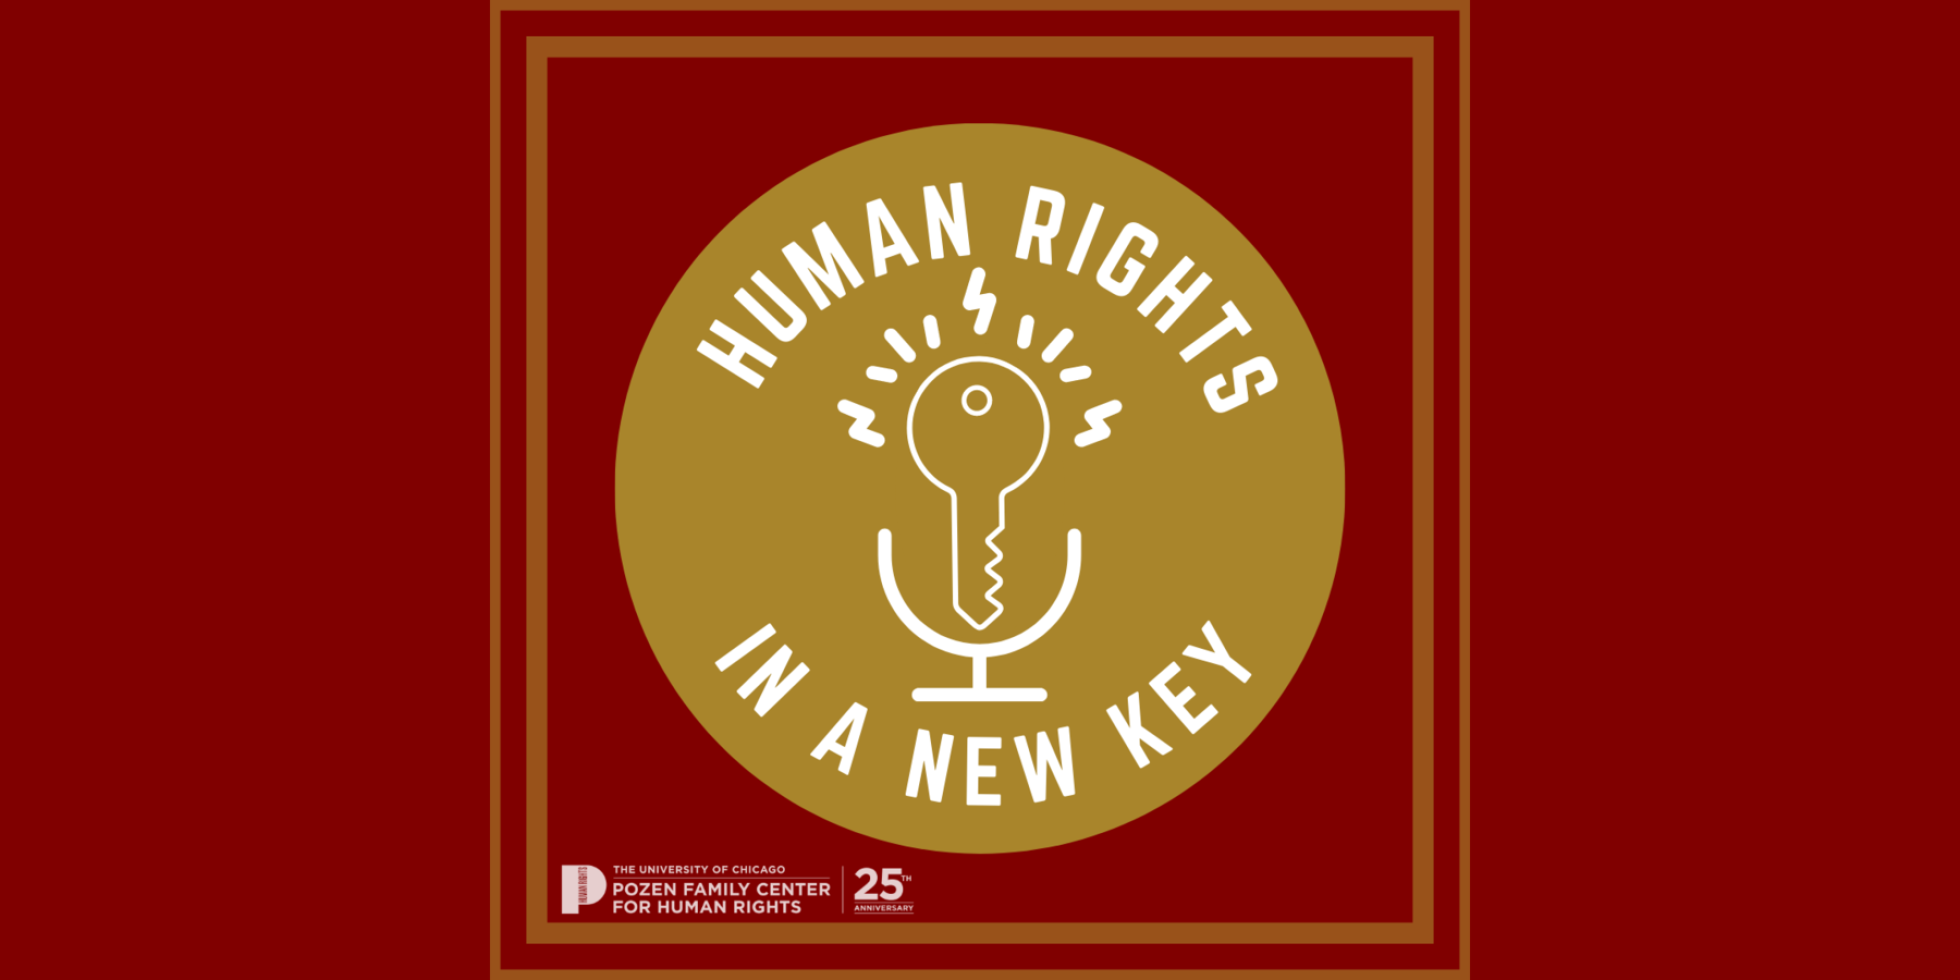 Human Rights in a New Key